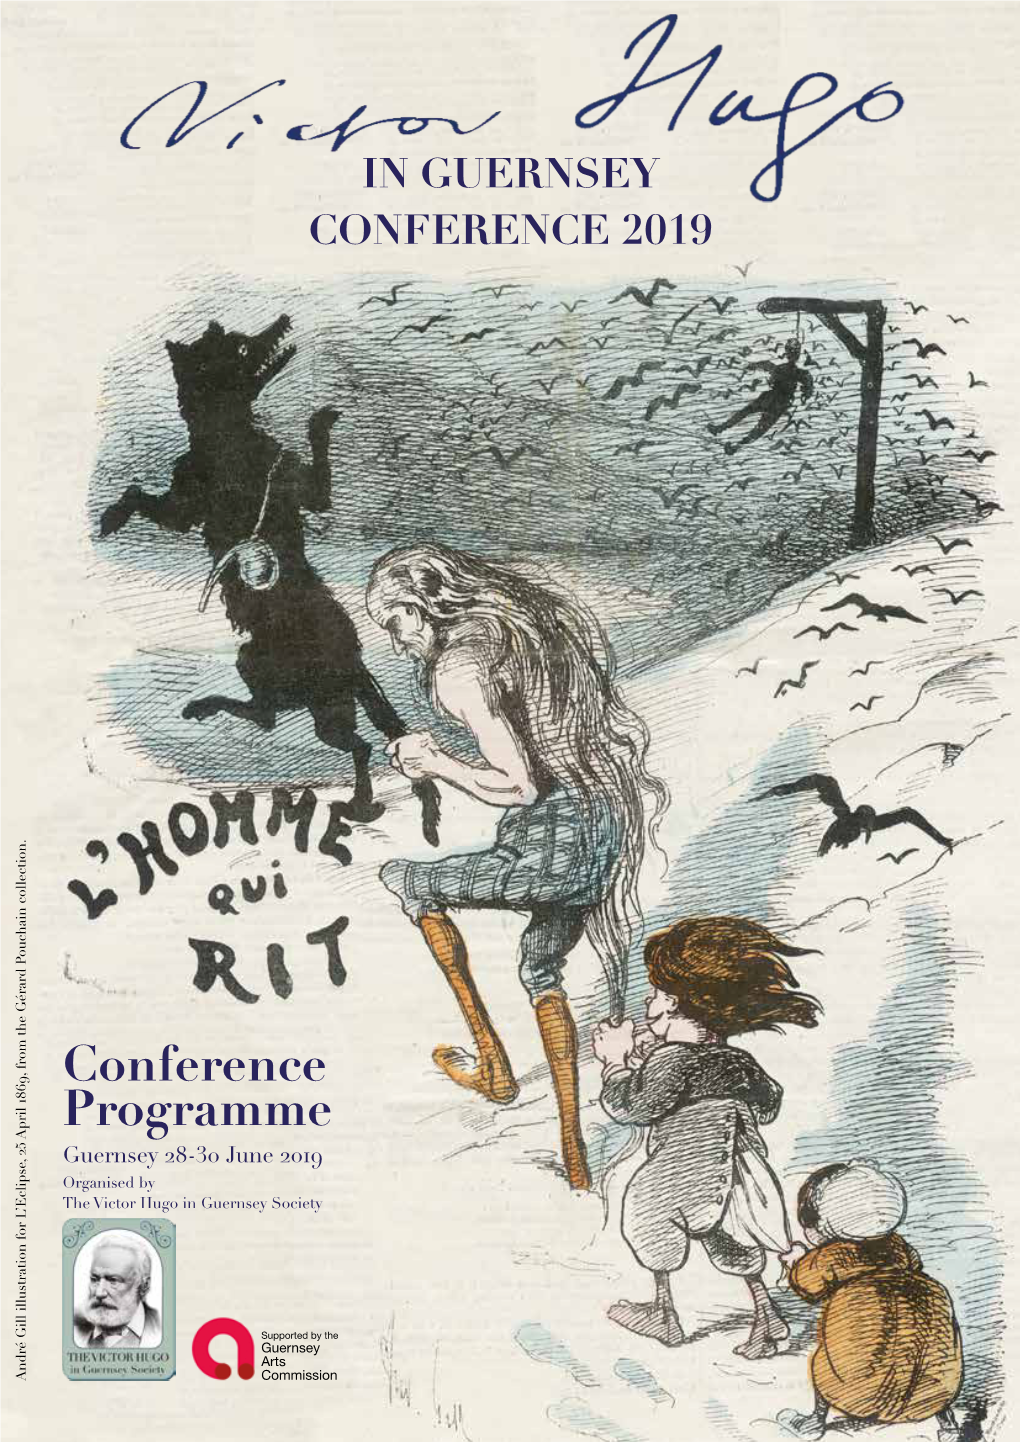 Conference Programme Guernsey 28-30 June 2019 Organised by the Victor Hugo in Guernsey Society